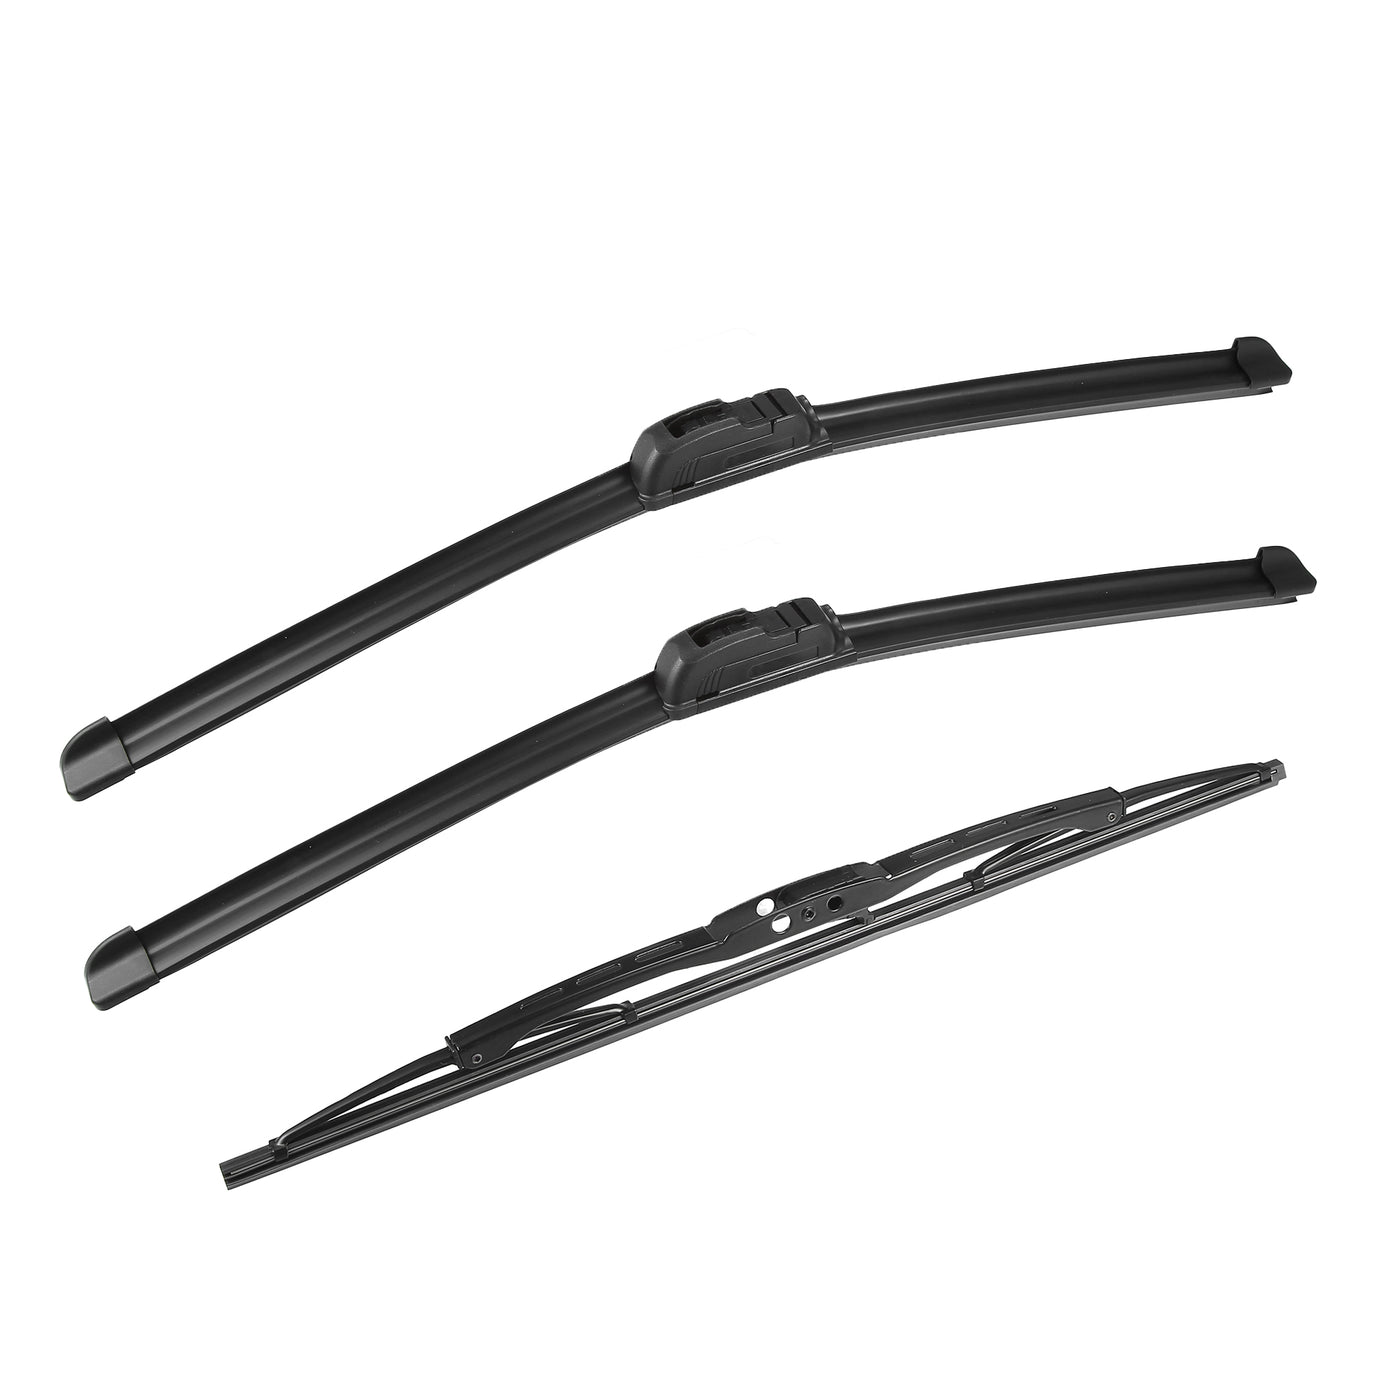 ACROPIX 19" 19" 16" Front Rear Windshield Wiper Blade Set Fit for Toyota Sequoia - Pack of 3 Black